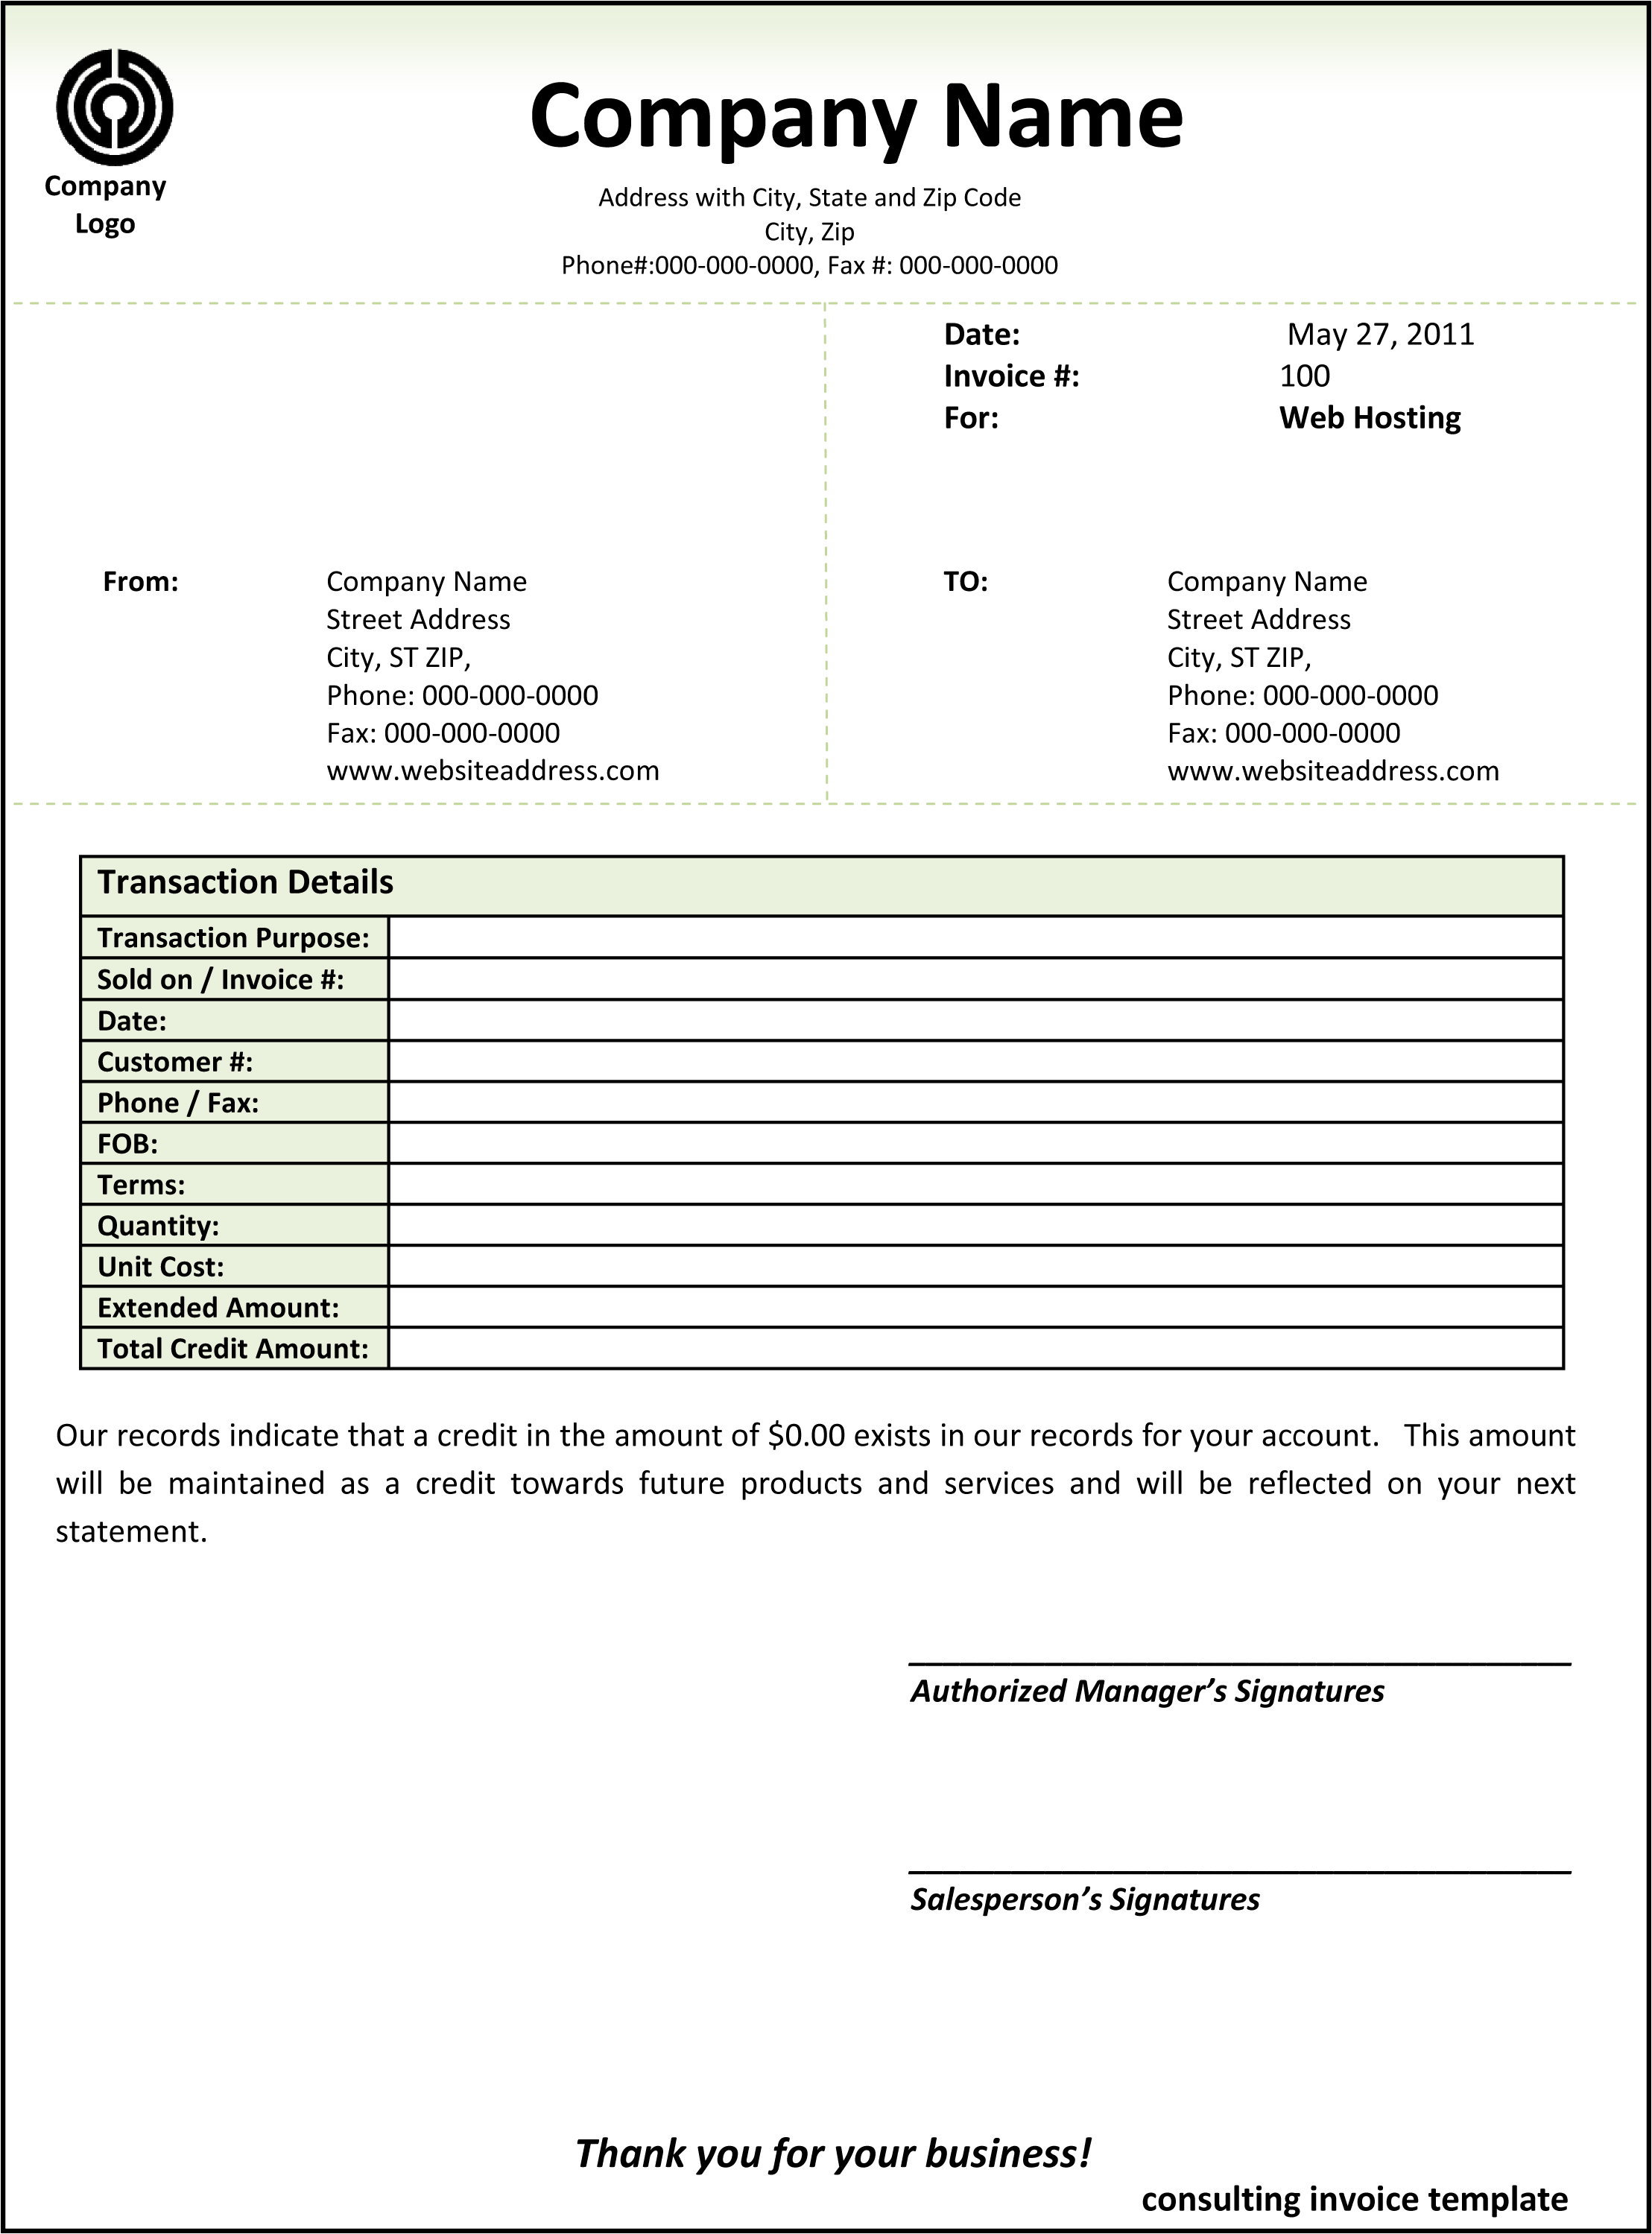 Consulting Invoice Template Word Invoice Example